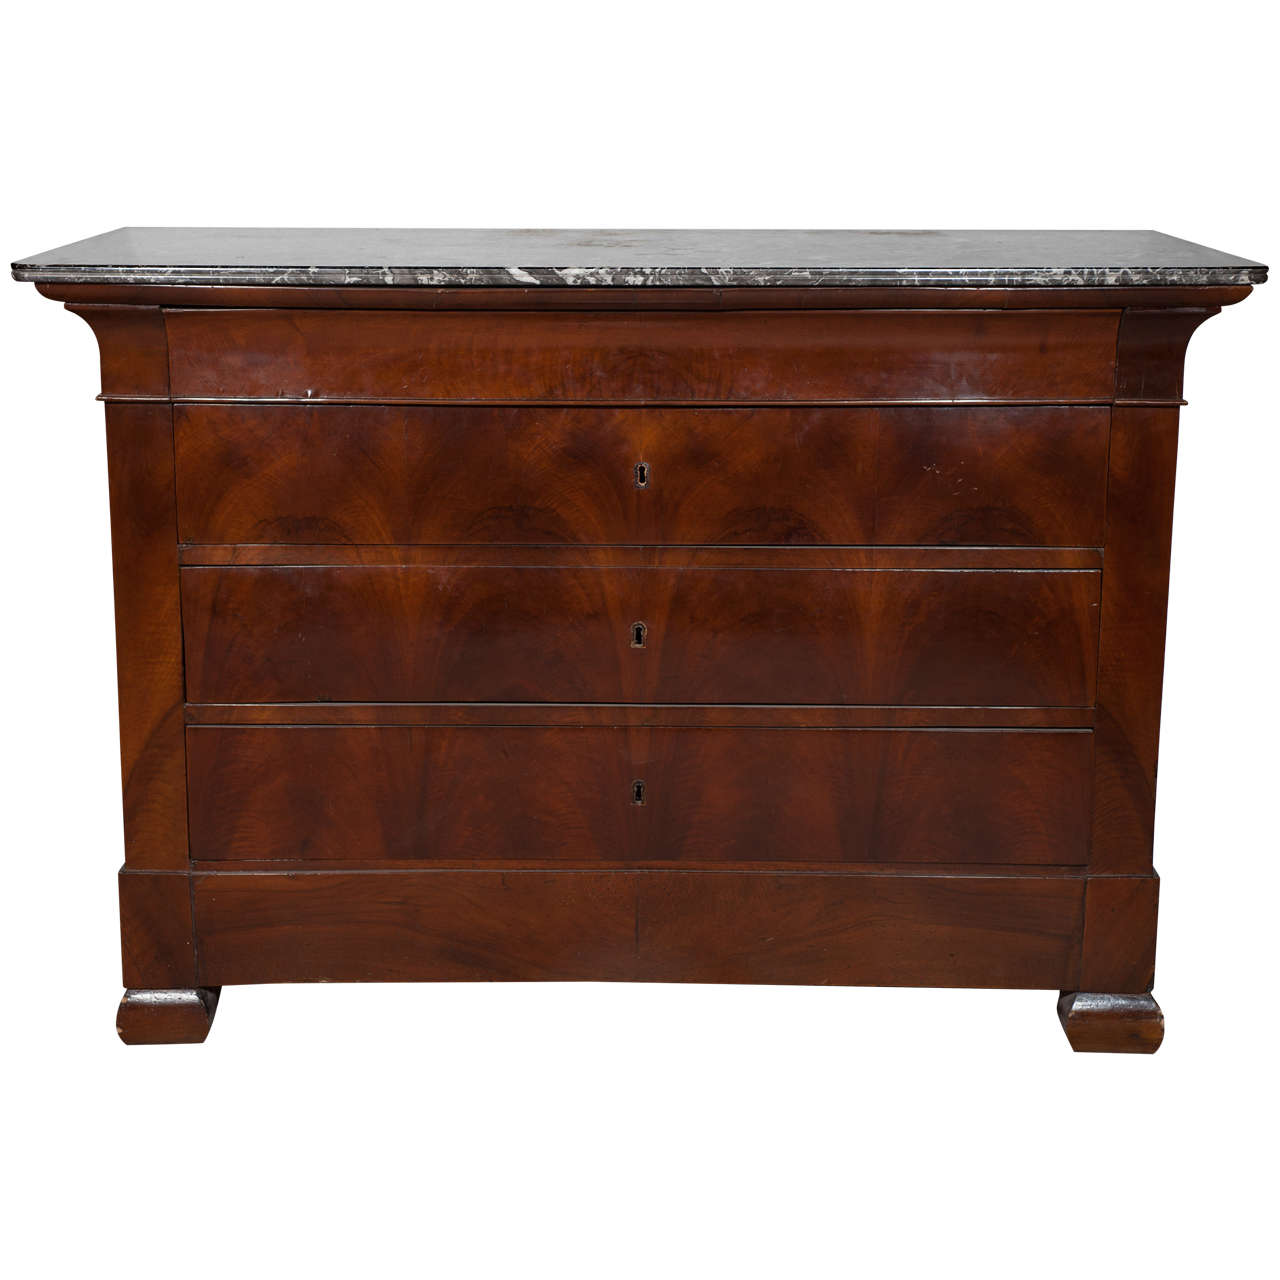 Early 19th Century French Mahogany Directoire Commode with Original Marble Top For Sale